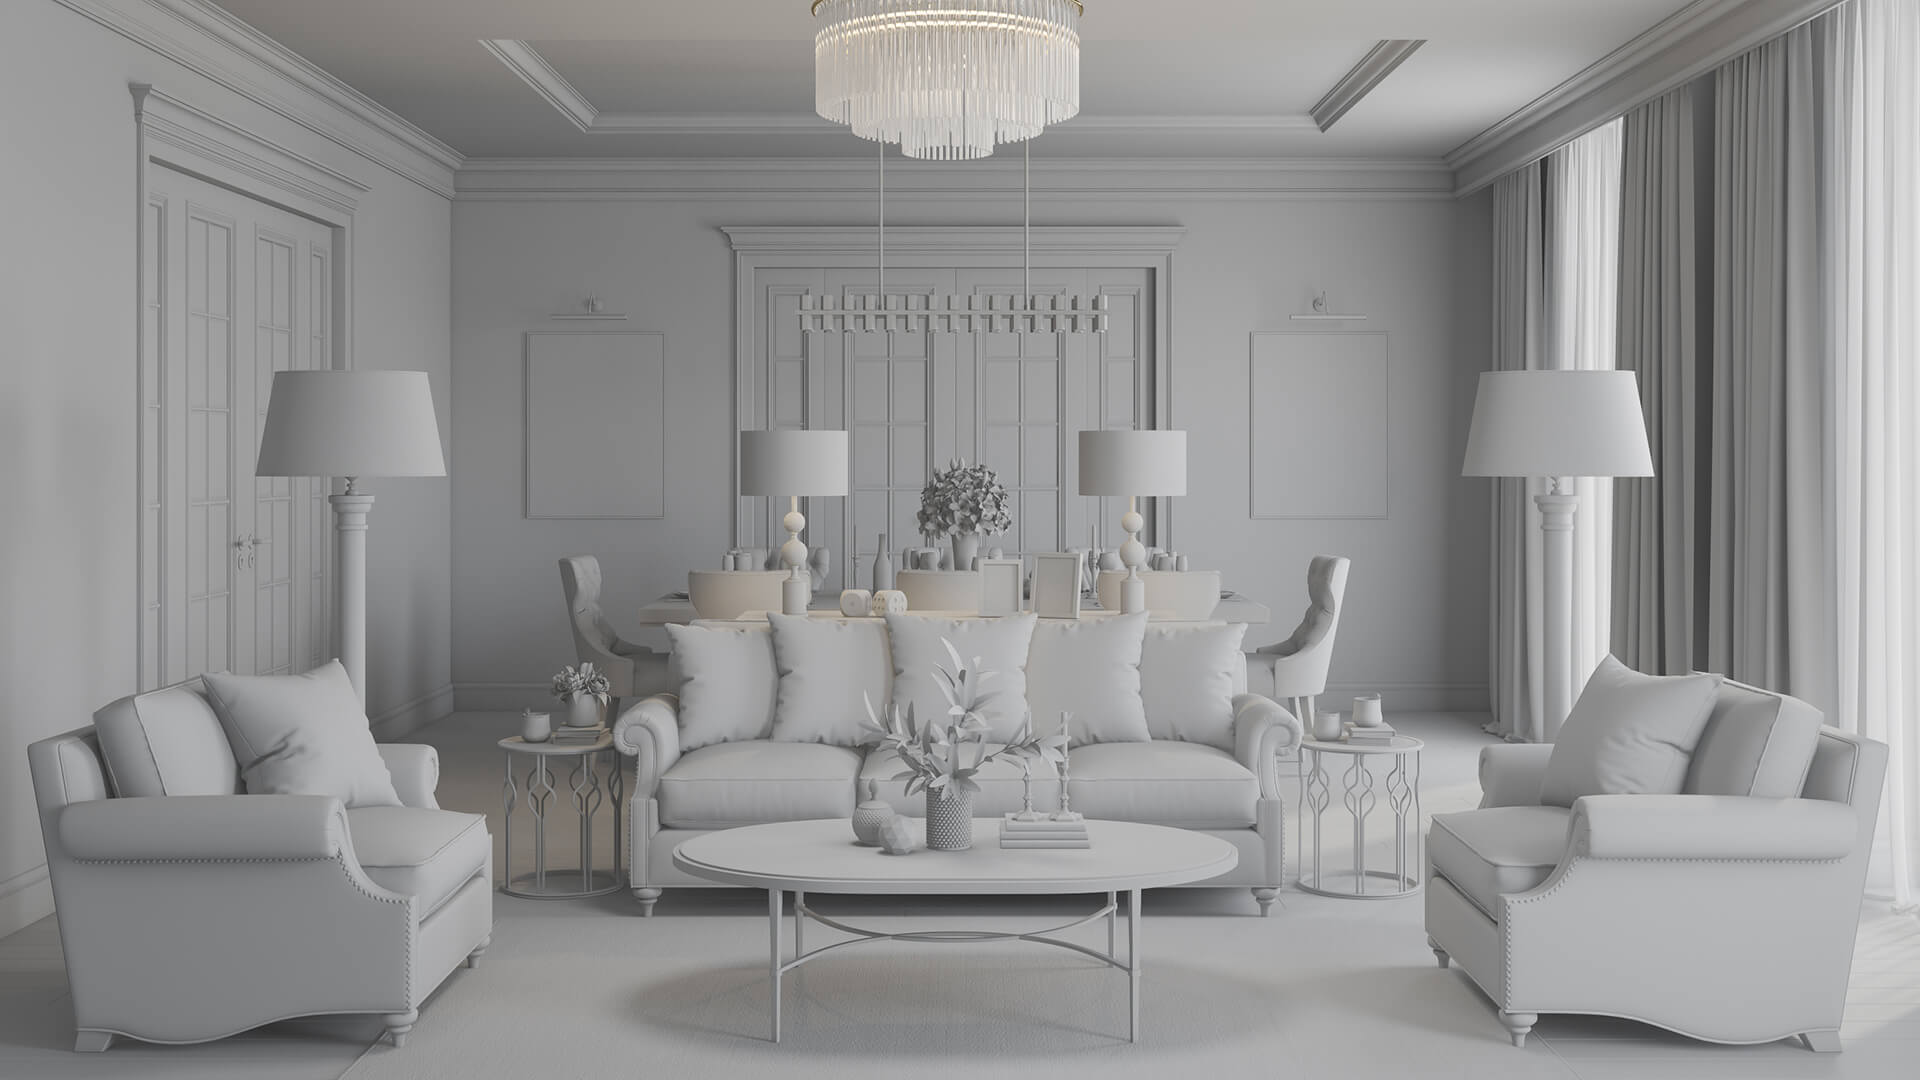 Grayscale 3D Render with Lighting